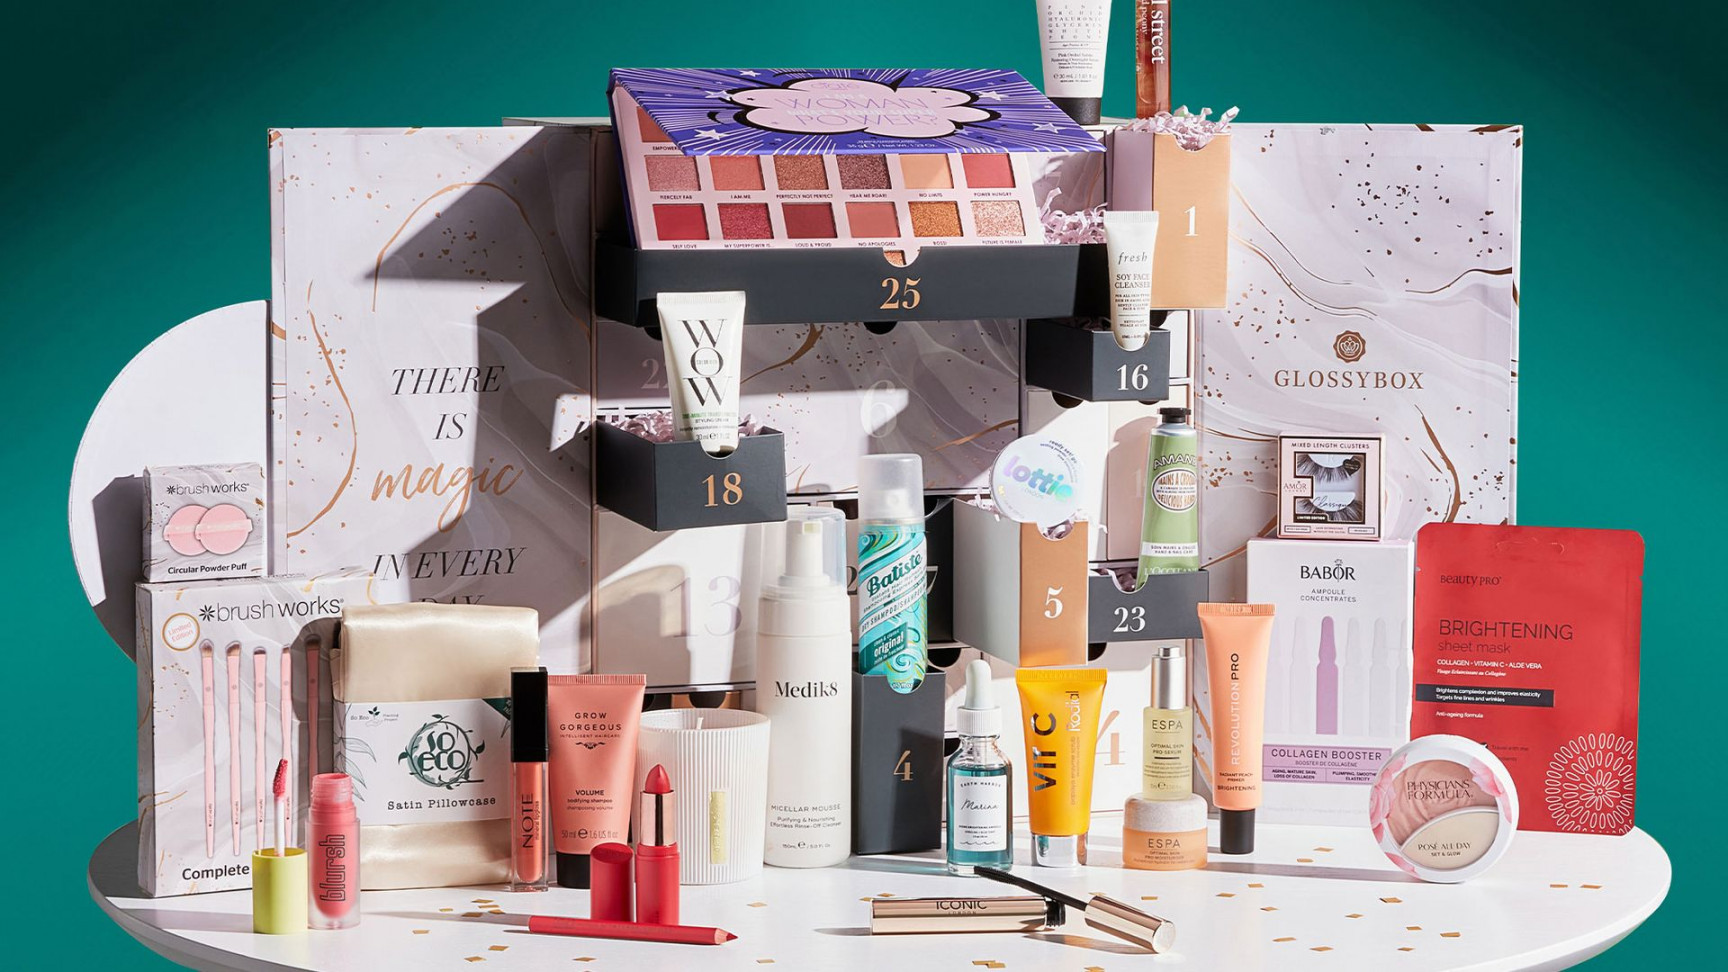 The GLOSSYBOX beauty advent calendar  is still in stock - but